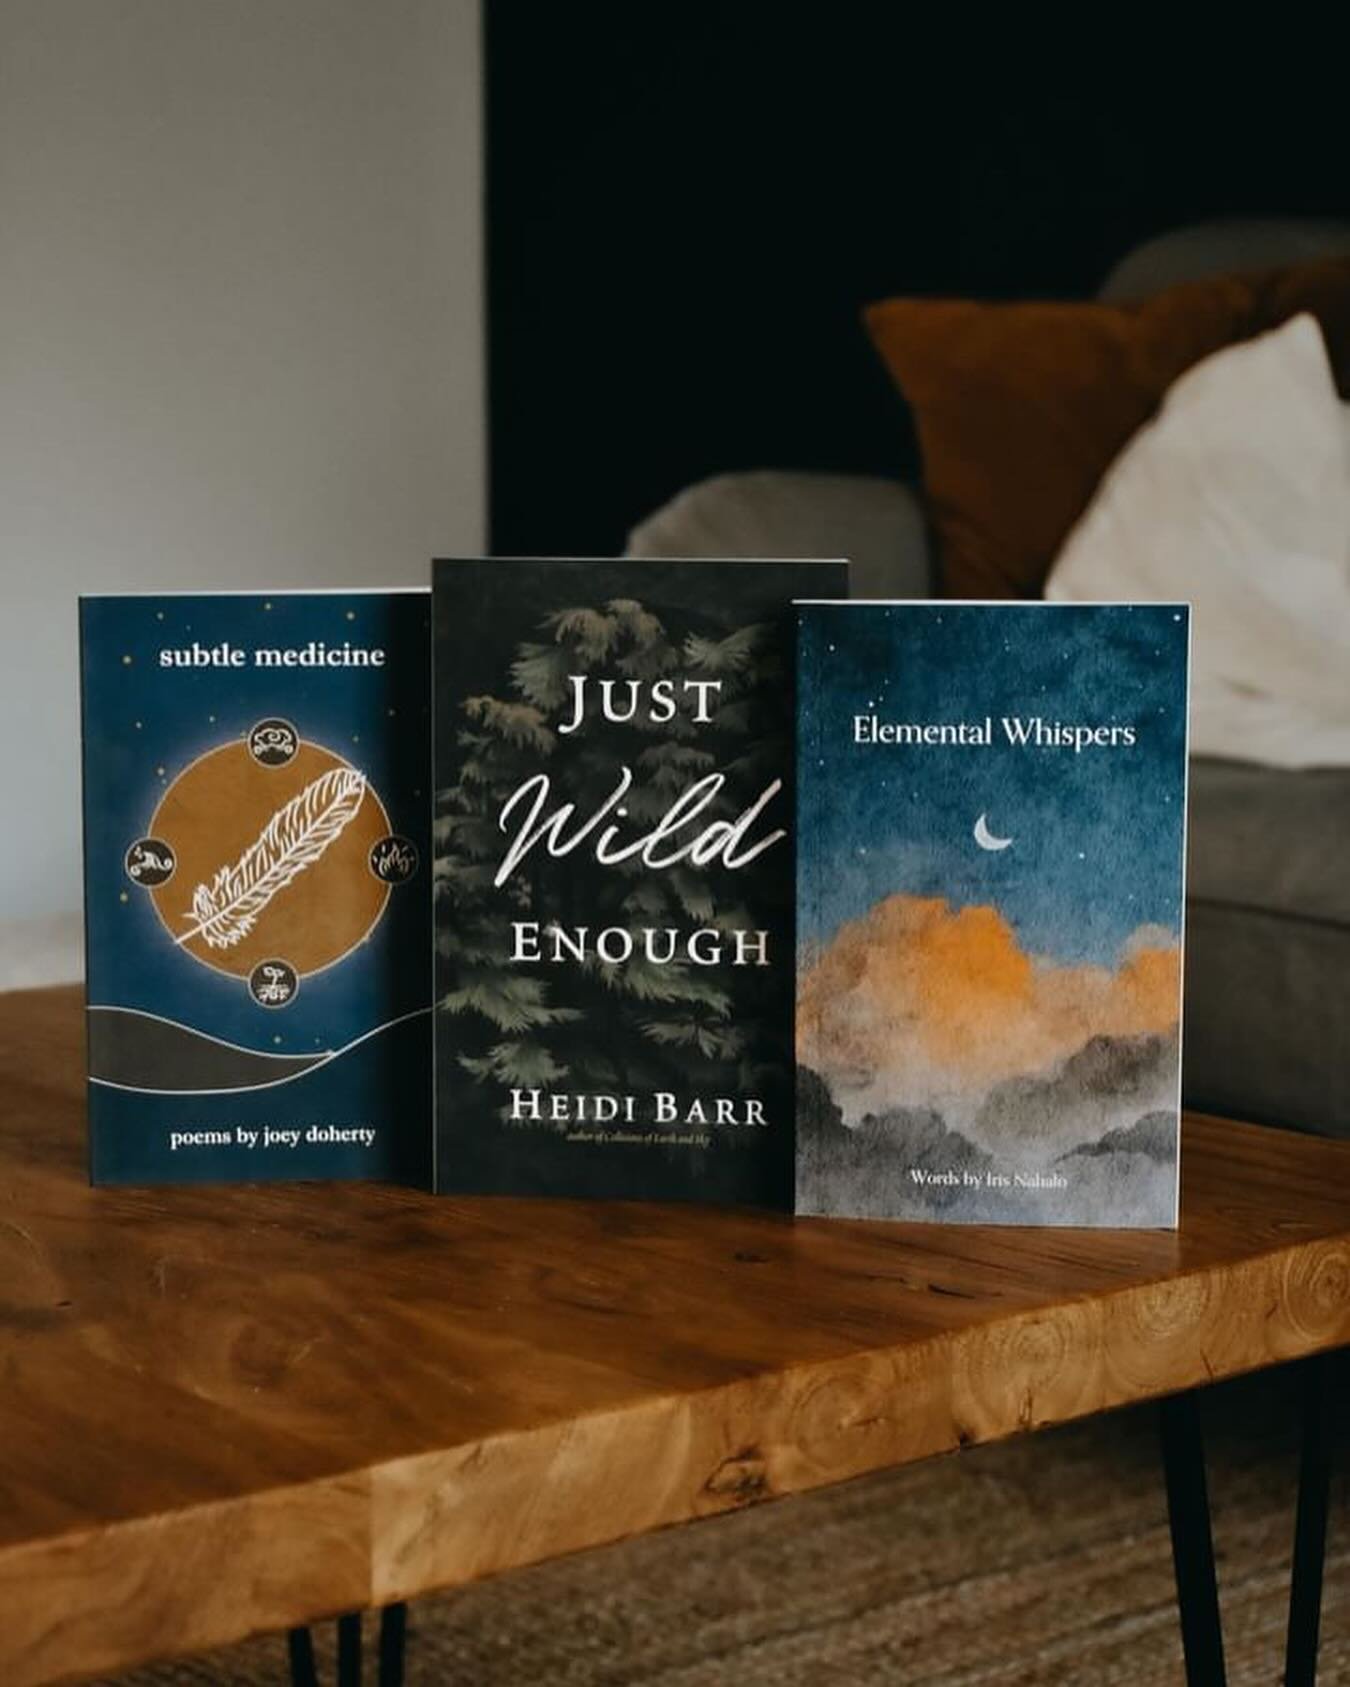 Time for someone to receive a book bundle of nature poetry! The books are authored and signed by Iris Nabalo, Heidi Barr, and myself. ⁣
⁣
To add your name to the hat:⁣
- Follow @nabalo, @heidicbarr, and @joeydoherty⁣
- Leave a comment describing your